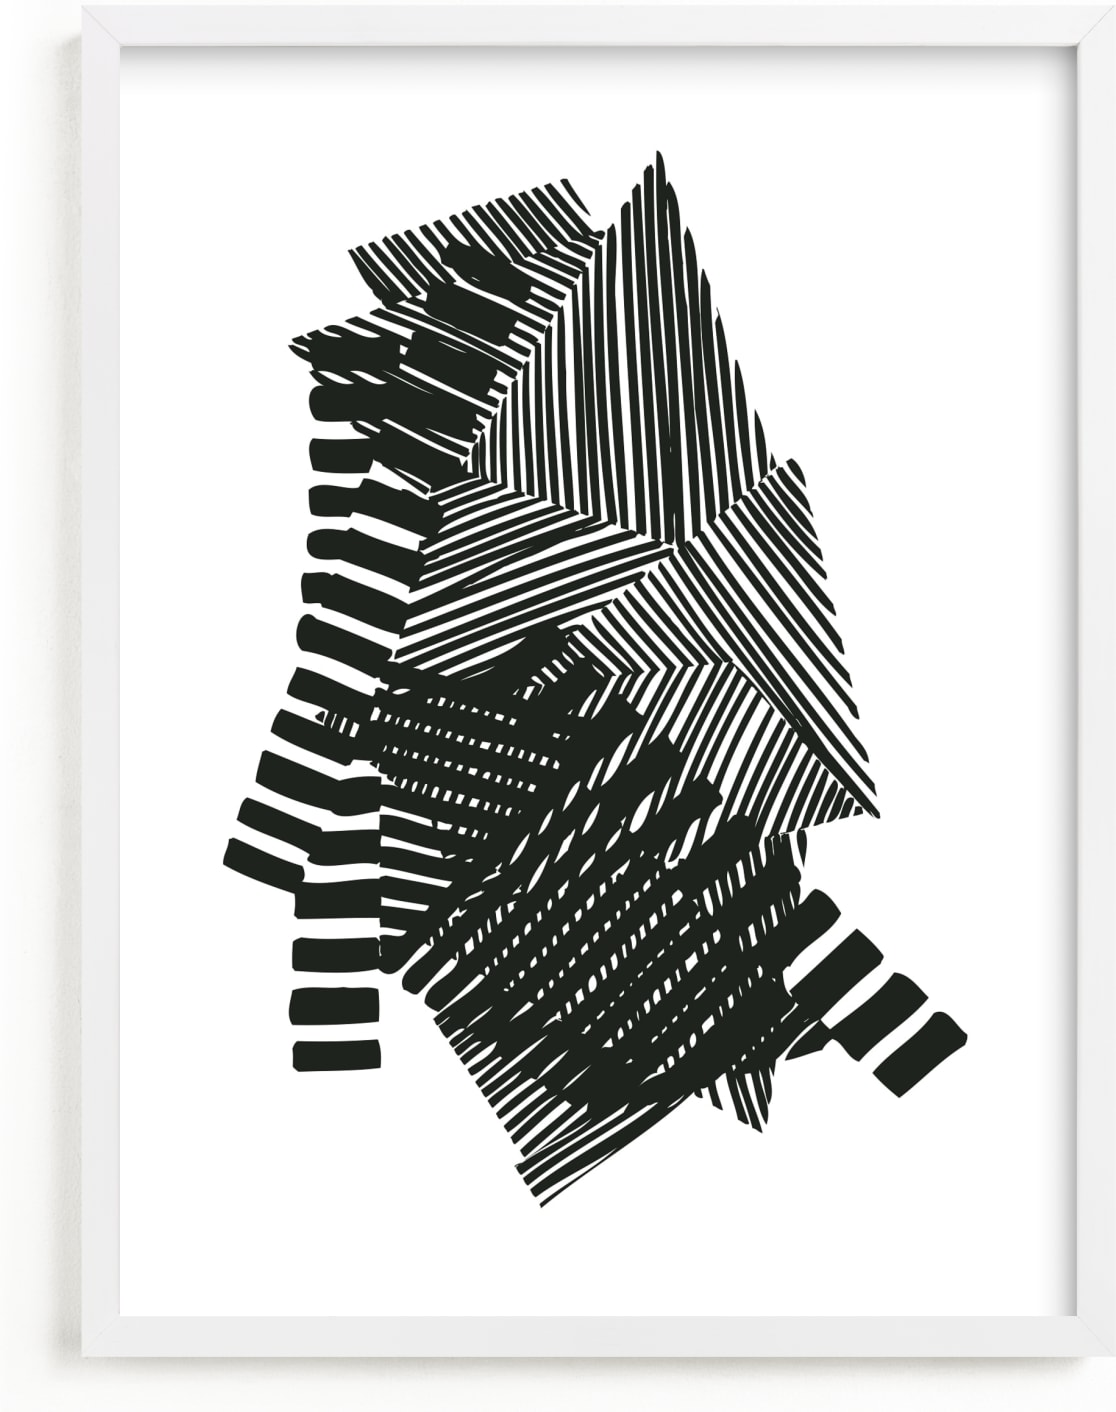 This is a black and white art by Jaime Derringer called Layers.